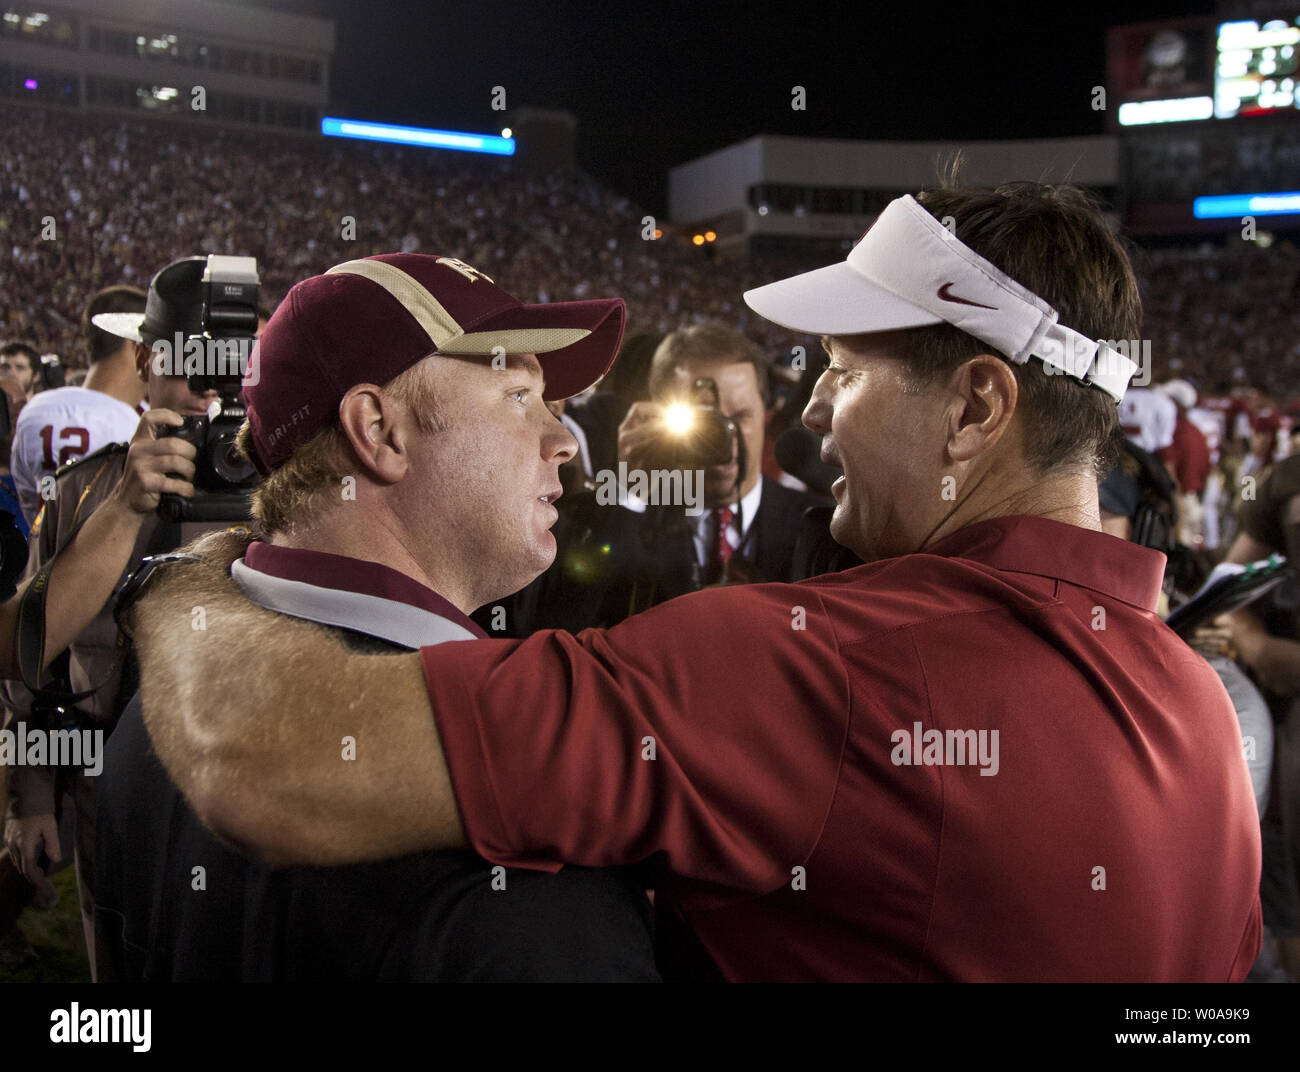 Florida State defensive coordinator Mark Stoops (L) congratulates his brother,  Oklahoma head coach Bob Stoops after the Oklahoma Sooners defeated the Florida State Seminoles 23-13 in  their NCAA football game in Tallahassee, Florida Sept 17, 2011.    UPI/Mark Wallheiser Stock Photo